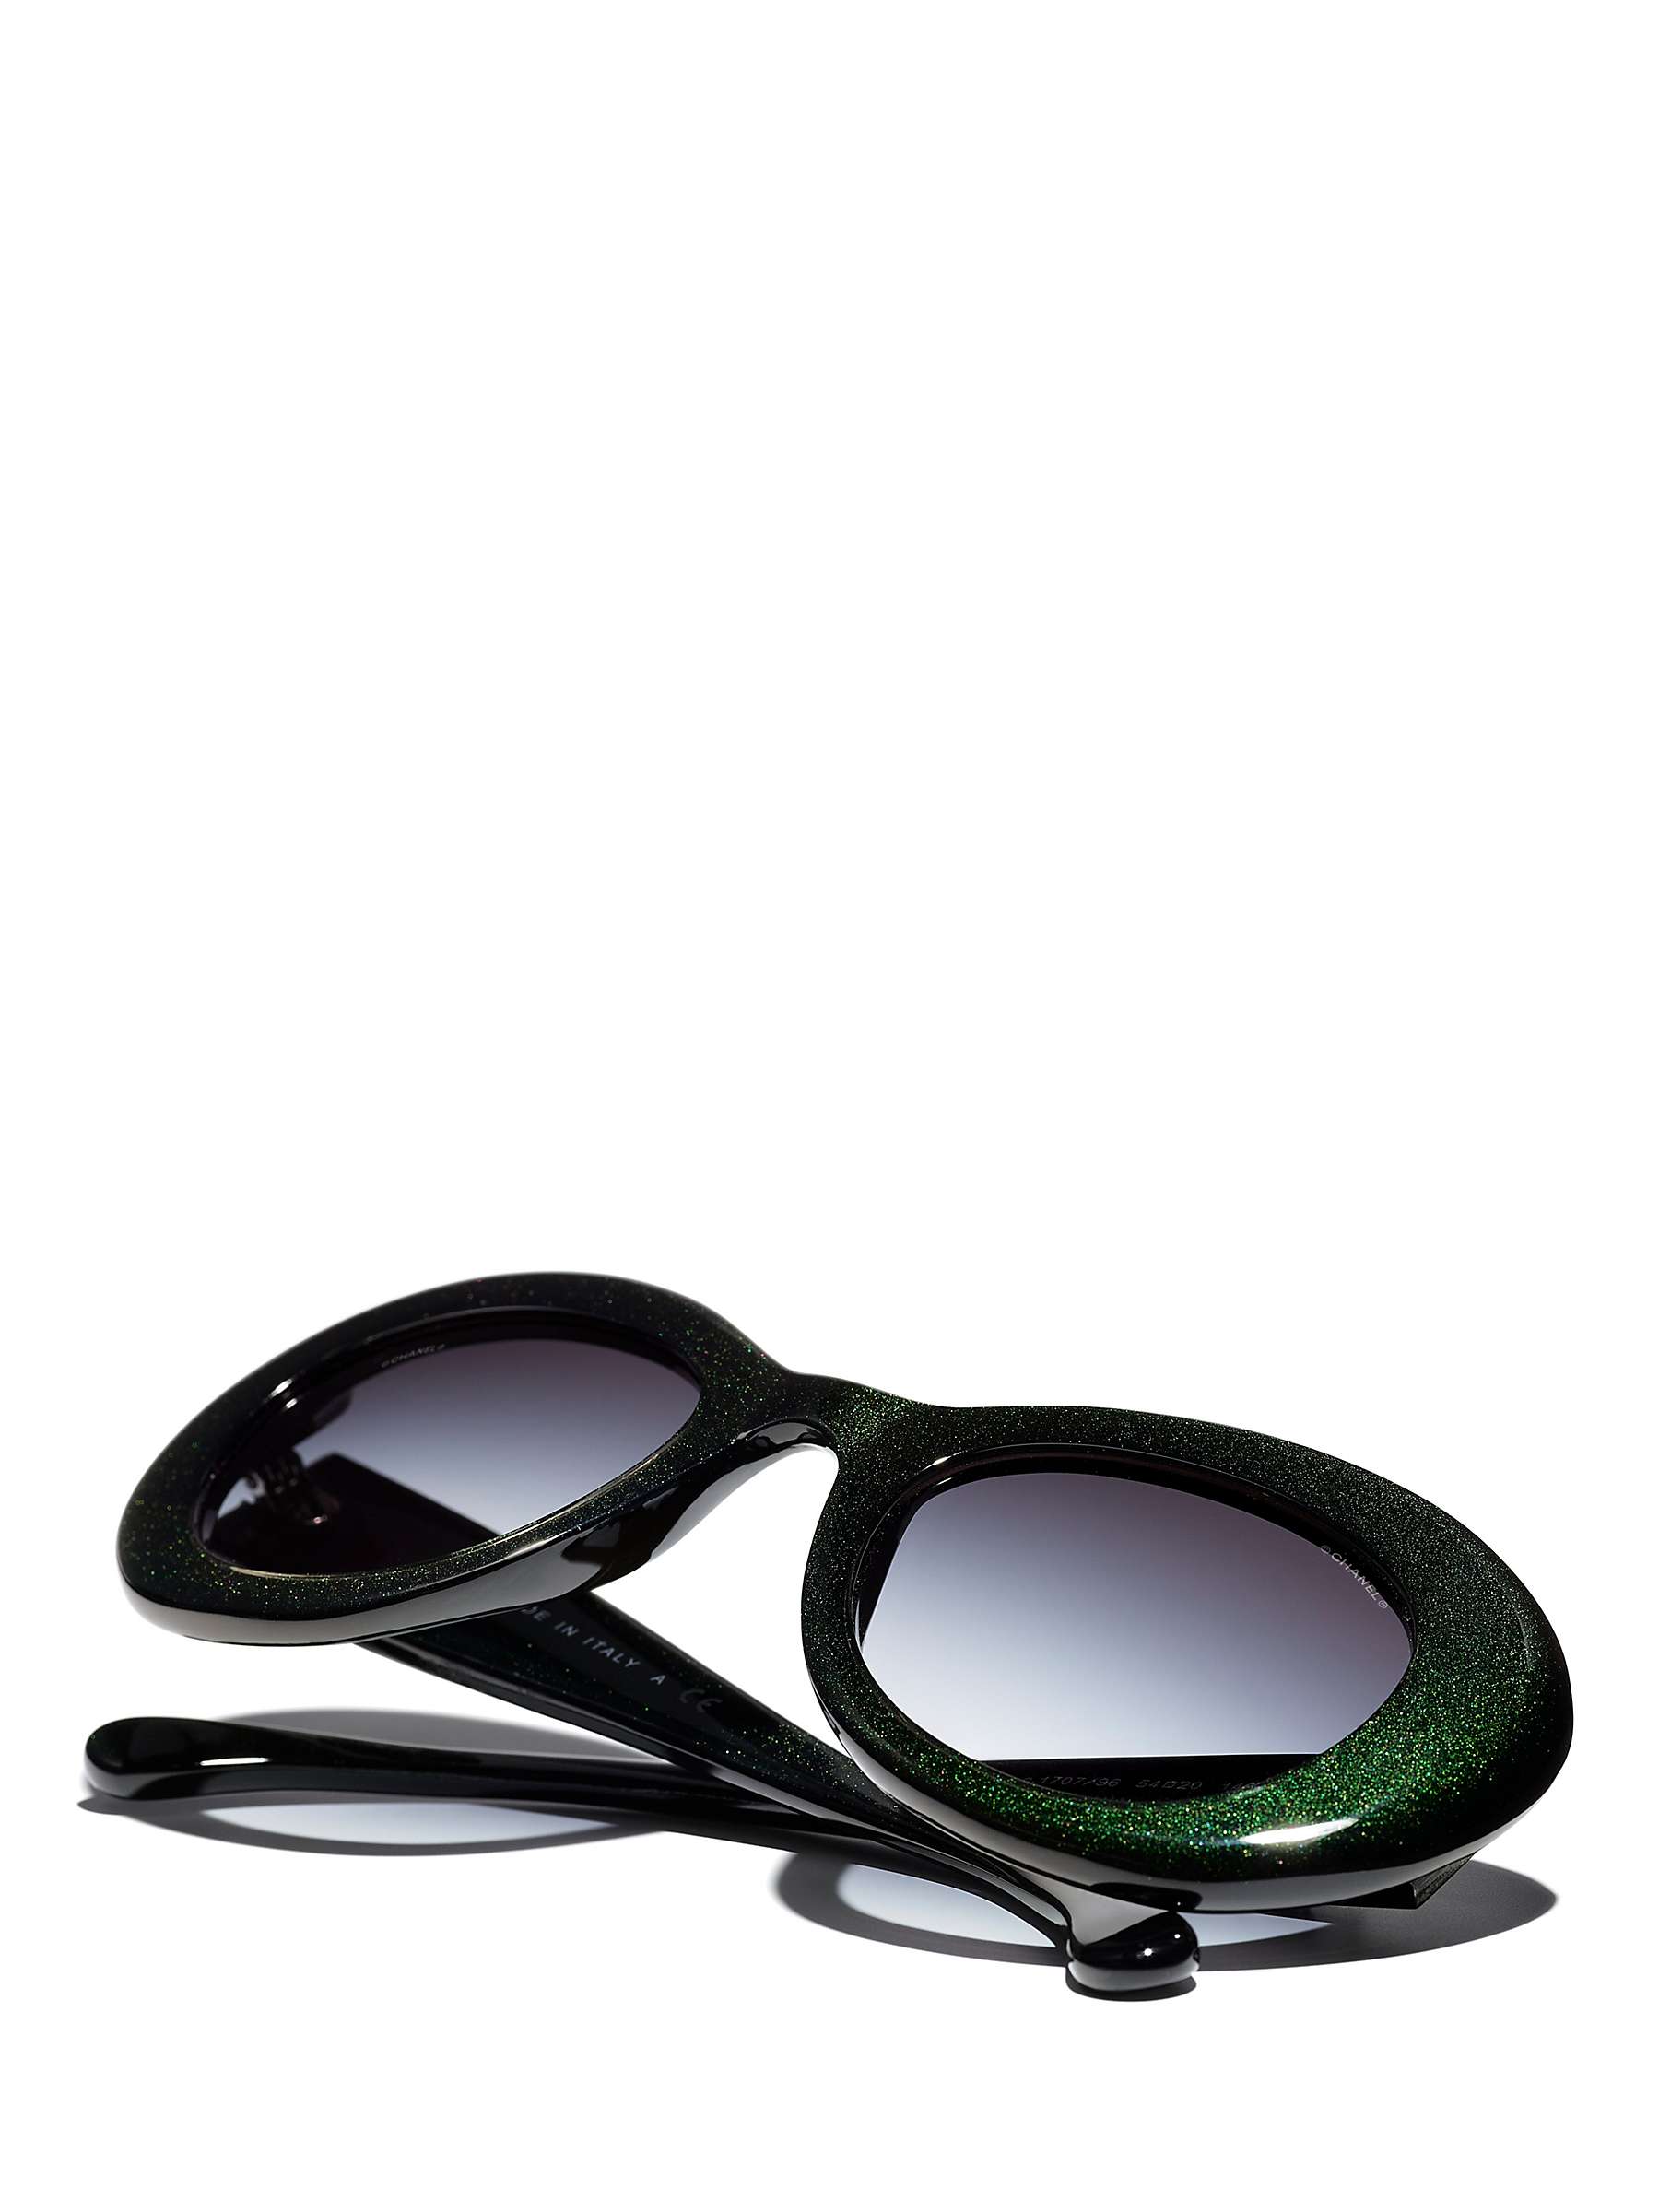 Buy CHANEL Oval Sunglasses CH5469B Iridescent Green/Blue Gradient Online at johnlewis.com